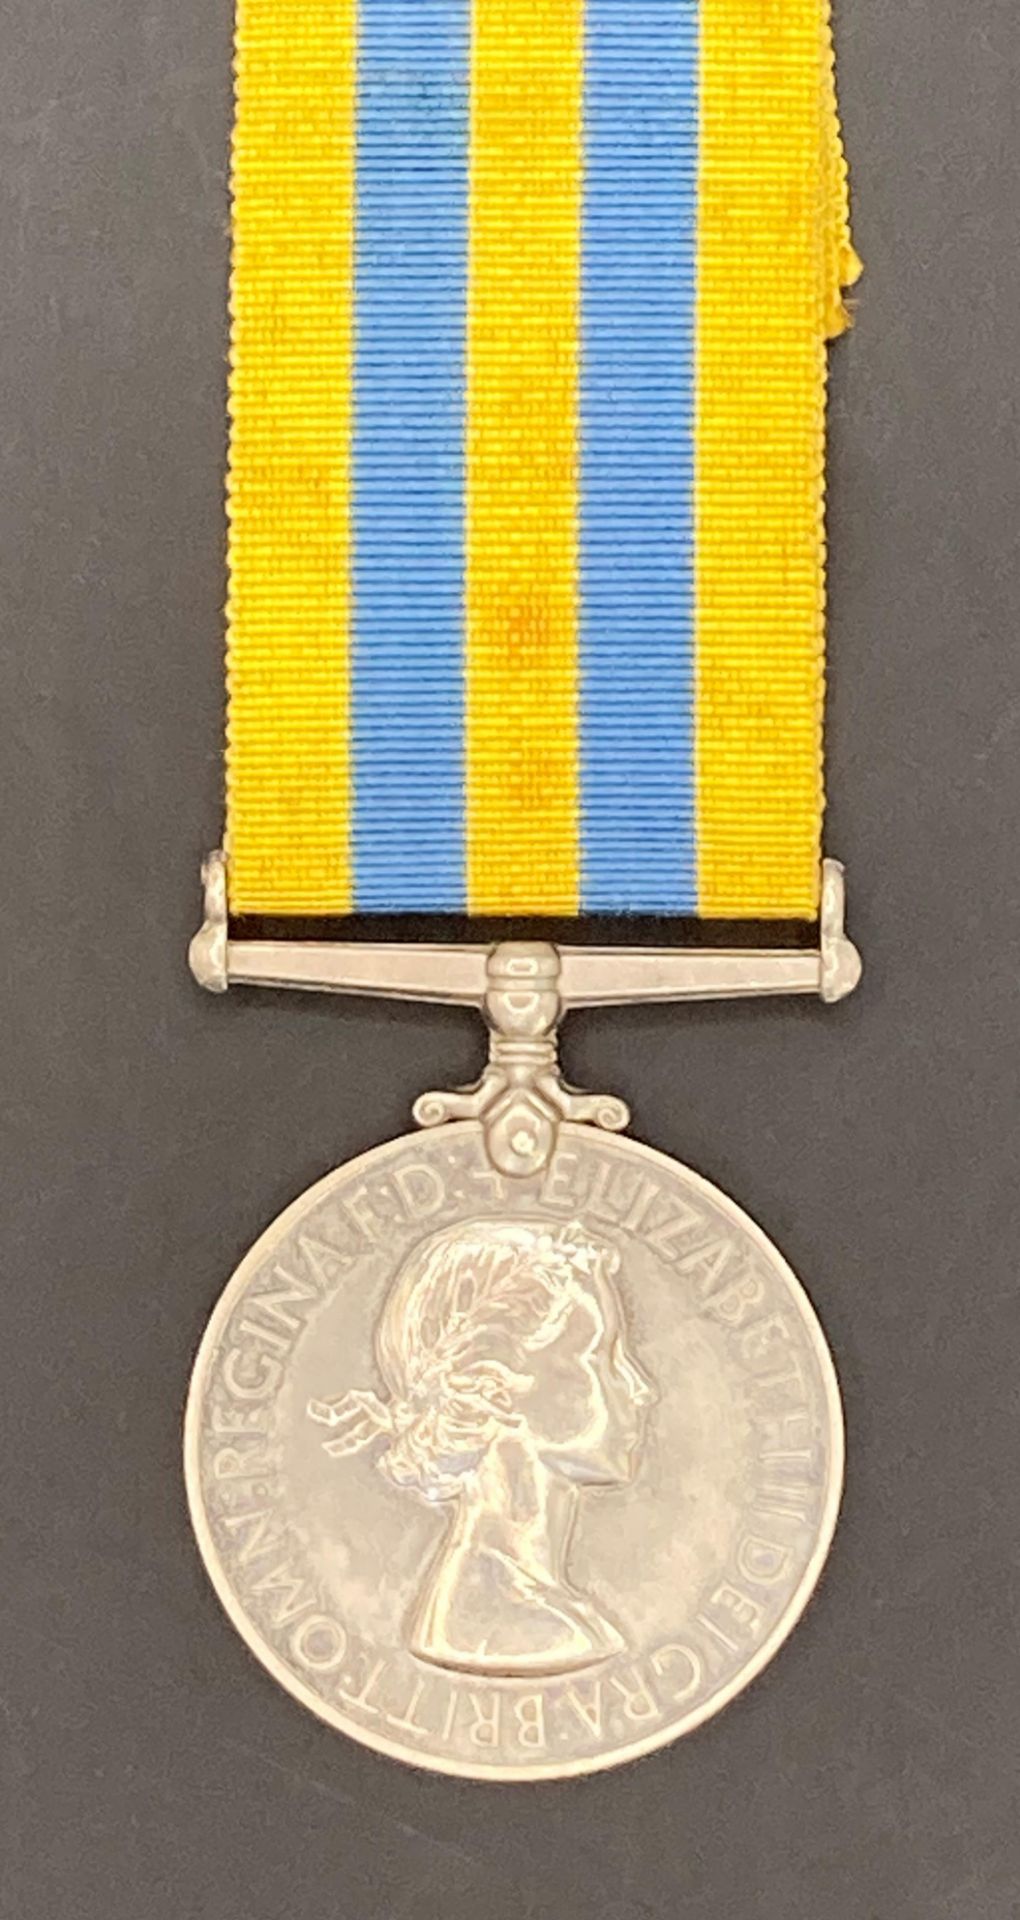 A Queens Korea medal and ribbon to 22463270 Pte. R Hatcher, the Welsh Regiment, wounded 24.5.